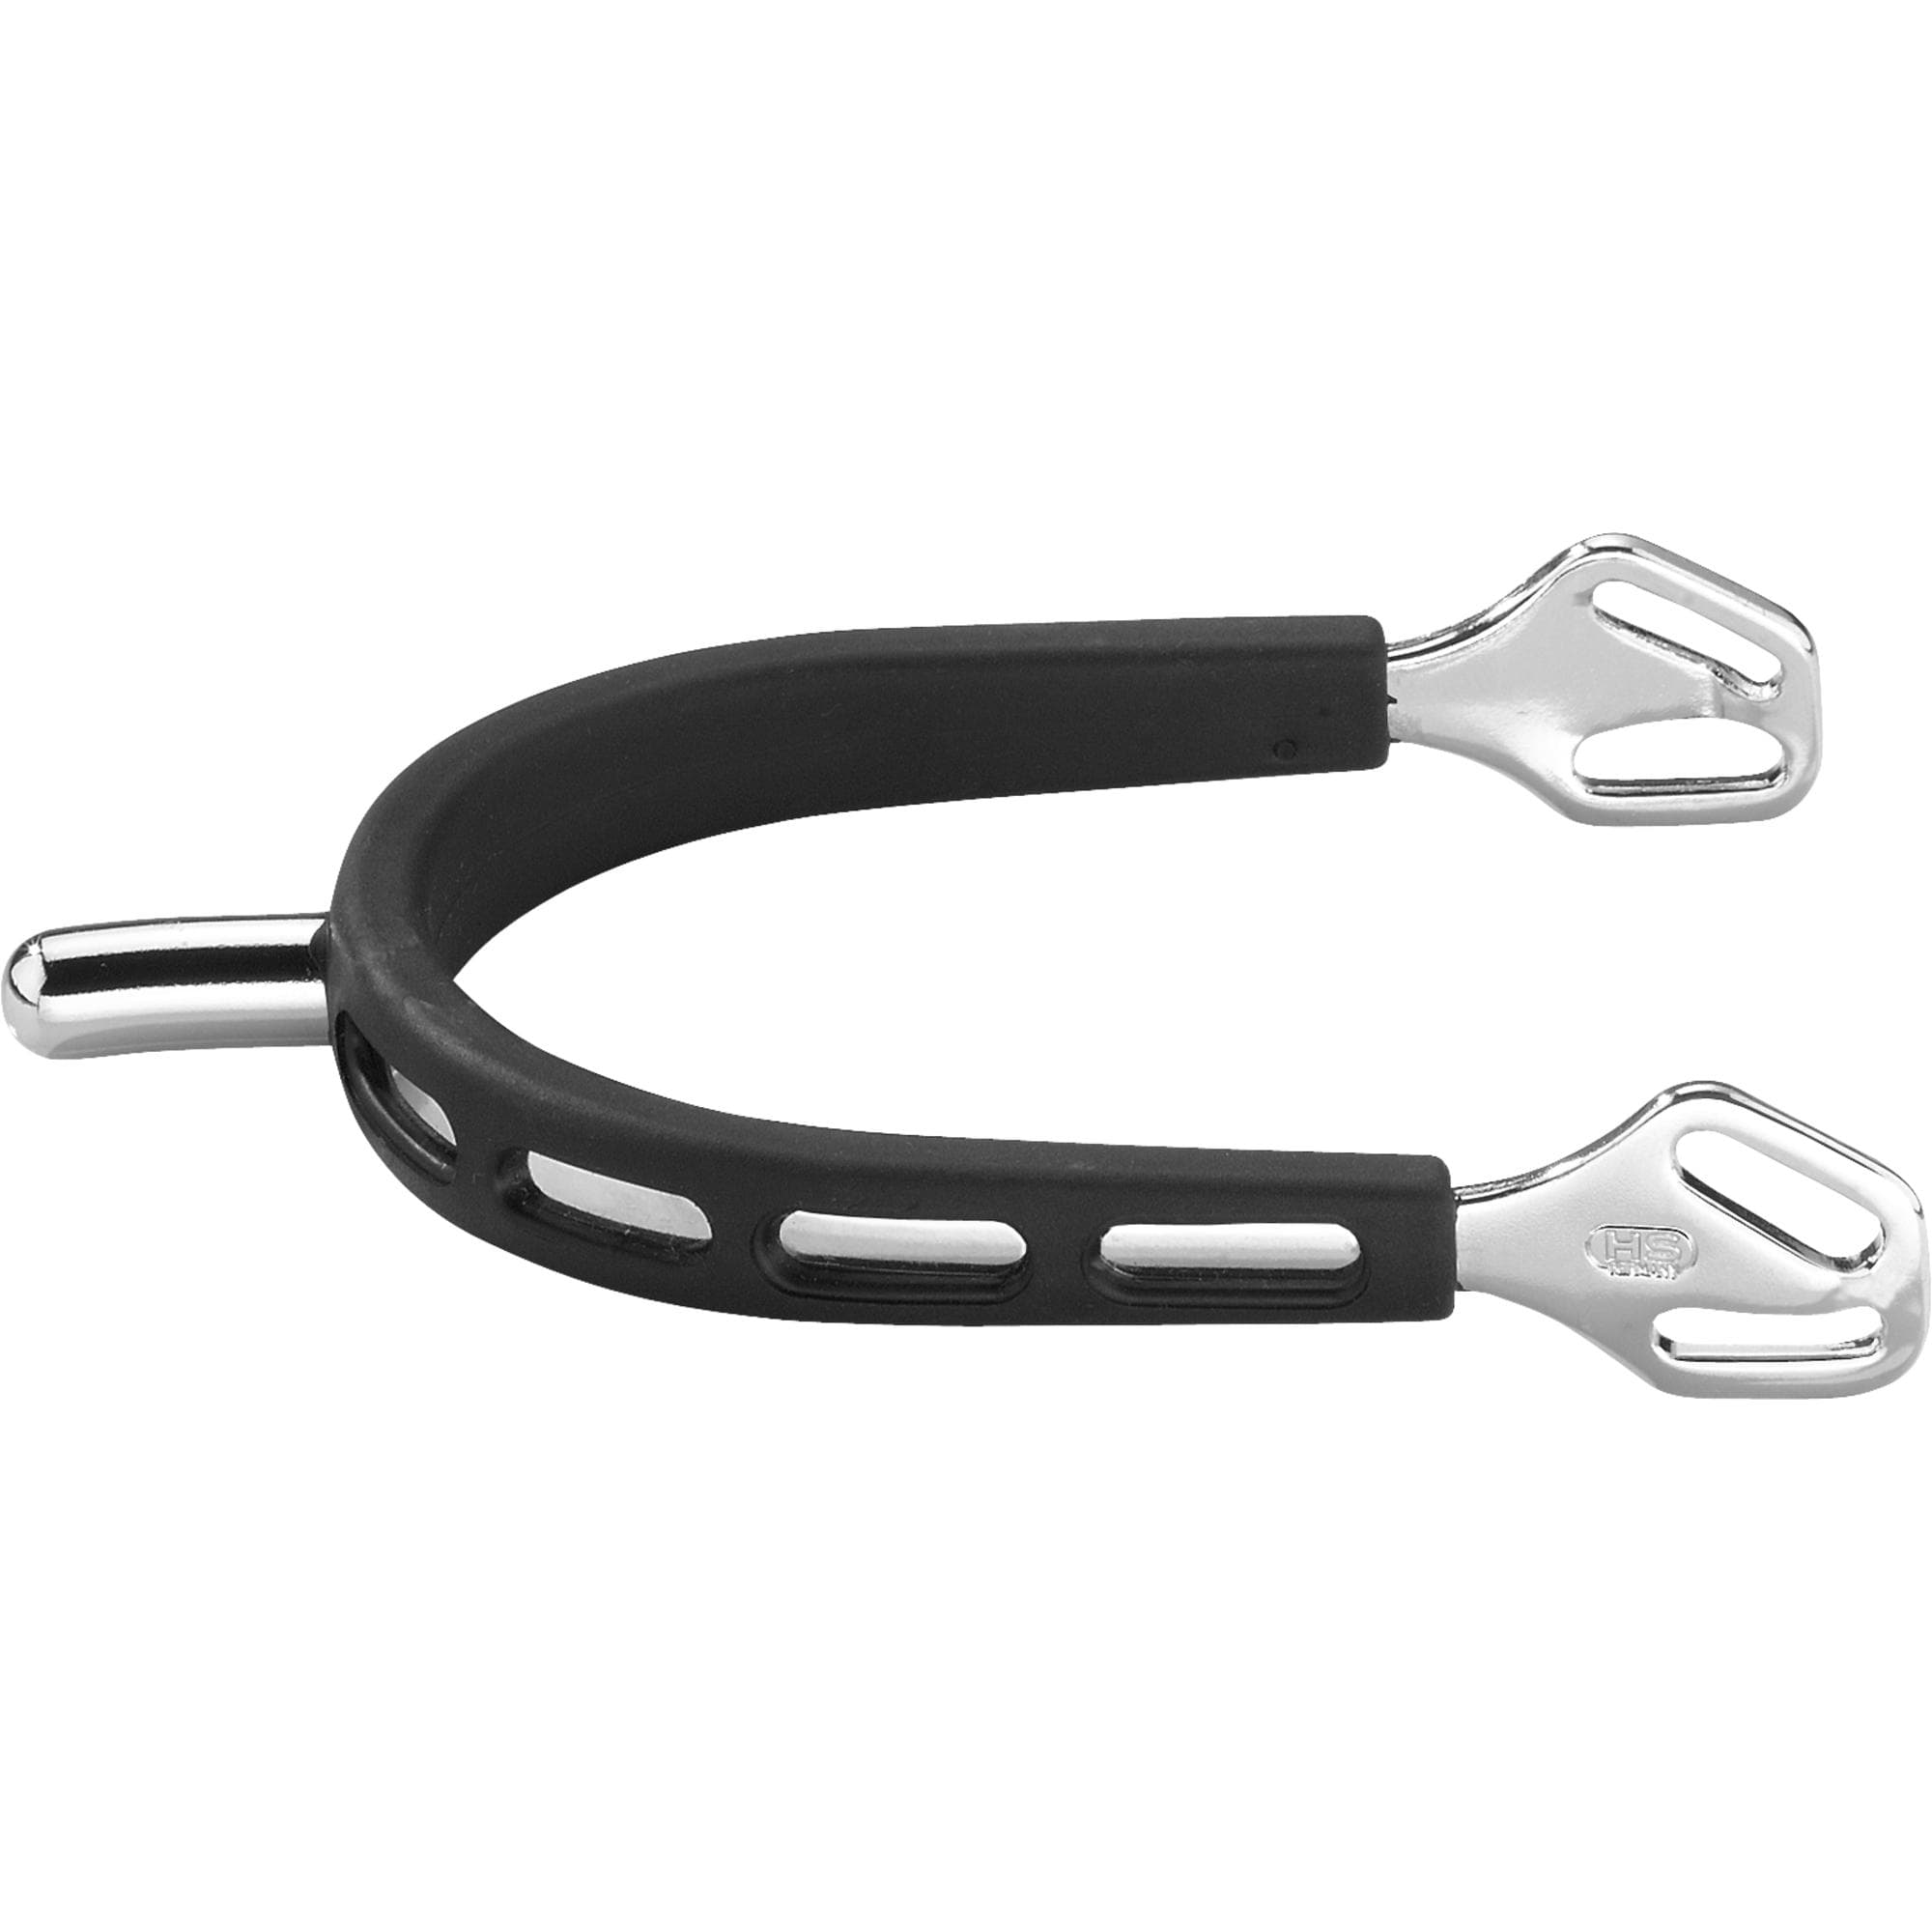 Herm Sprenger Stainless Steel Ultra Fit Extra Grip Spurs w/ Rounded Neck- 25mm - Breeches.com